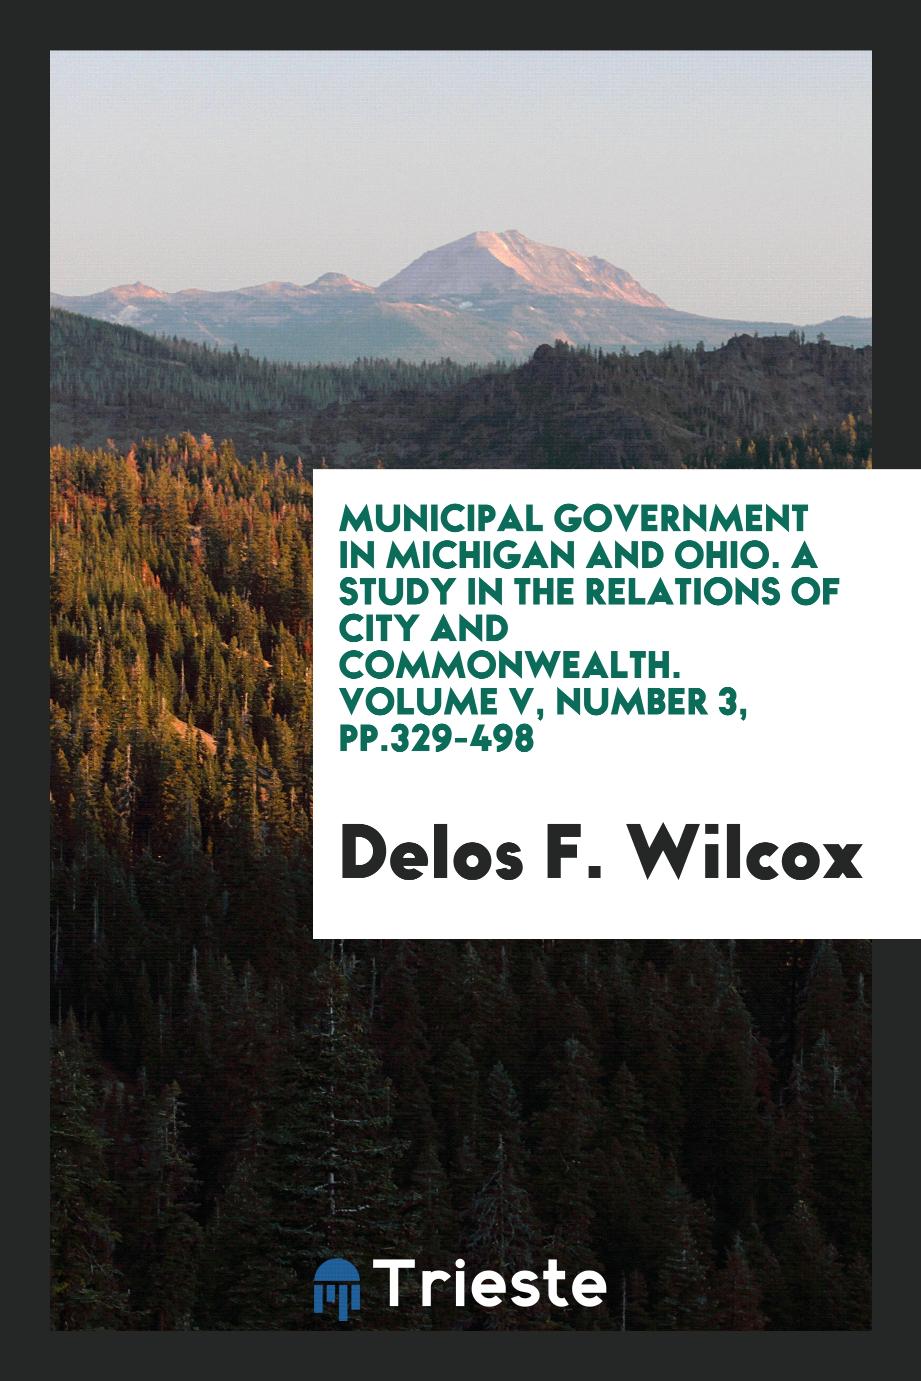 Municipal government in Michigan and Ohio. A study in the relations of city and commonwealth. Volume V, Number 3, pp.329-498